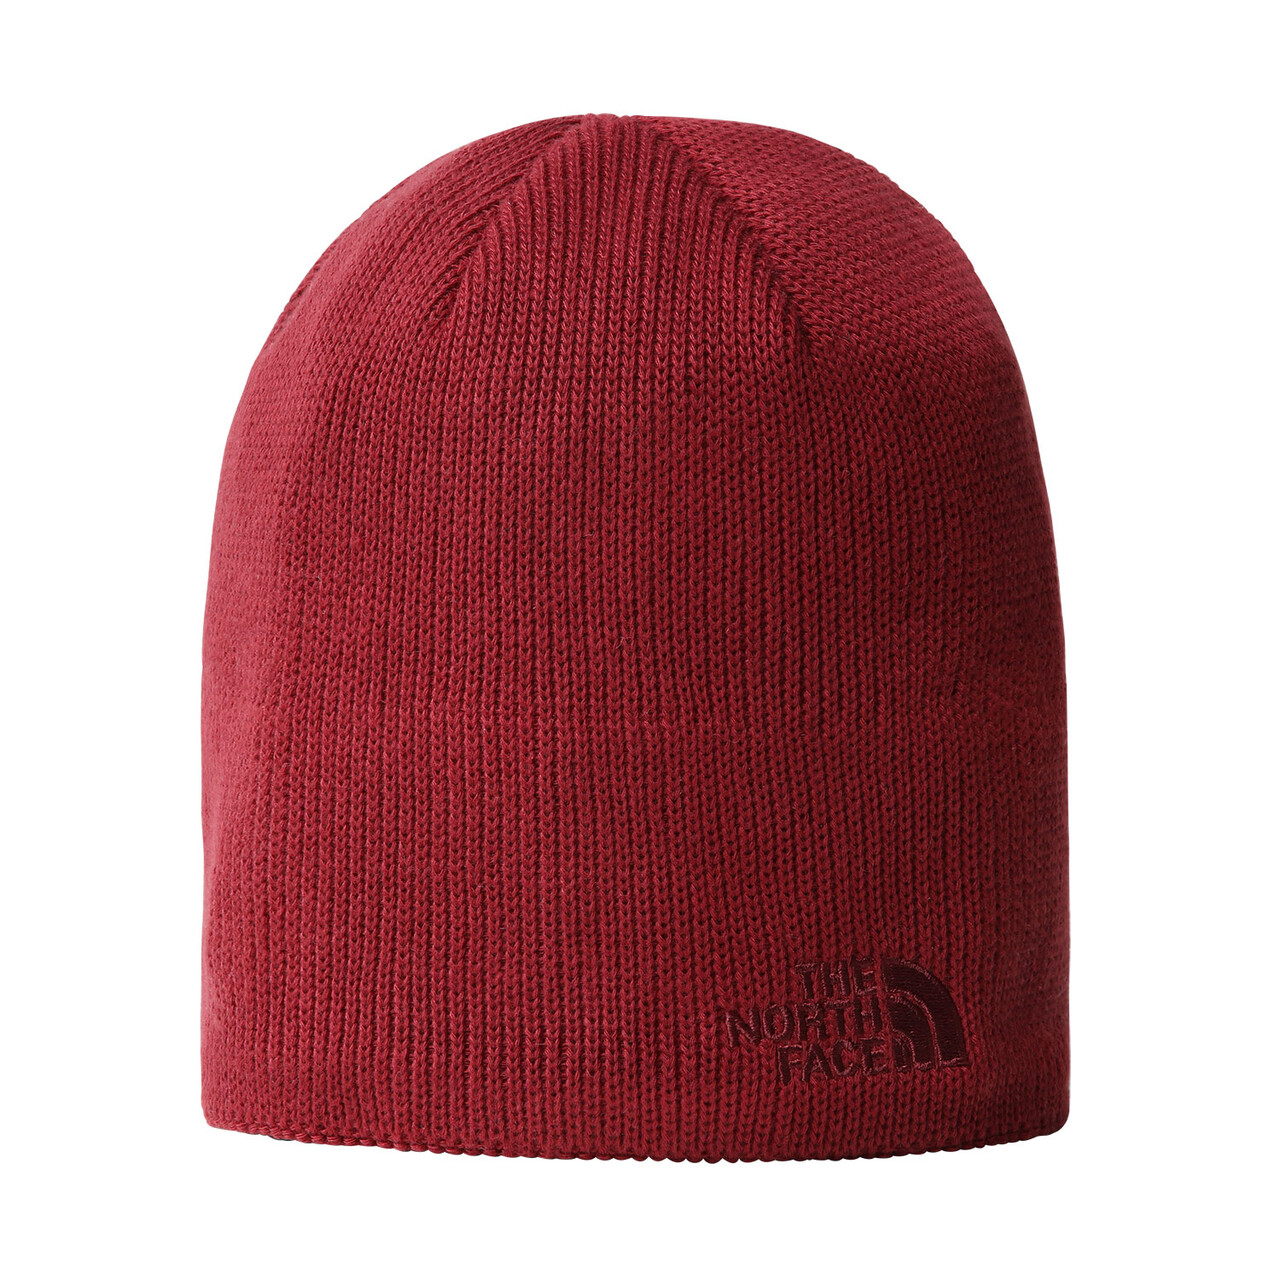 The North Face Bones Recycled Beanie (RED (CORDOVAN) One size (ONE SIZE))